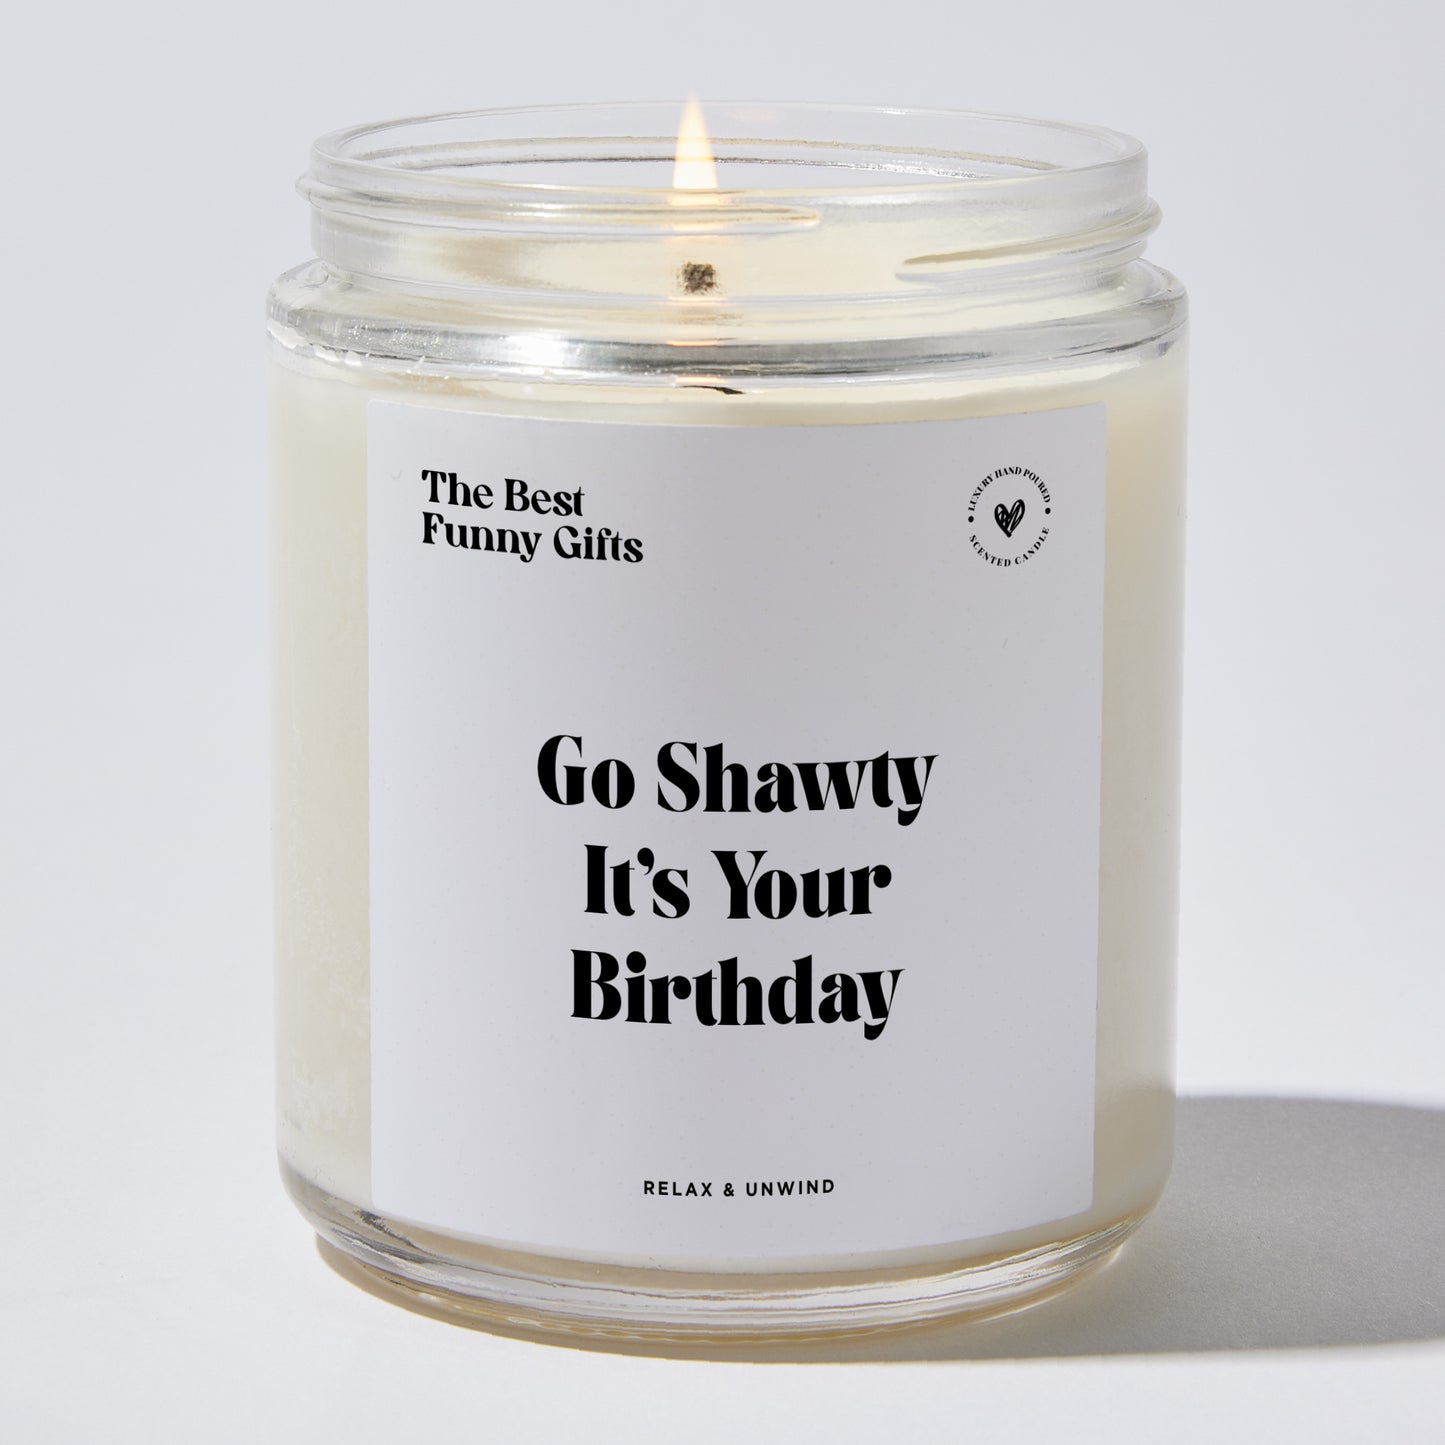 Birthday Gift - Go Shawty It's Your Birthday - Candle